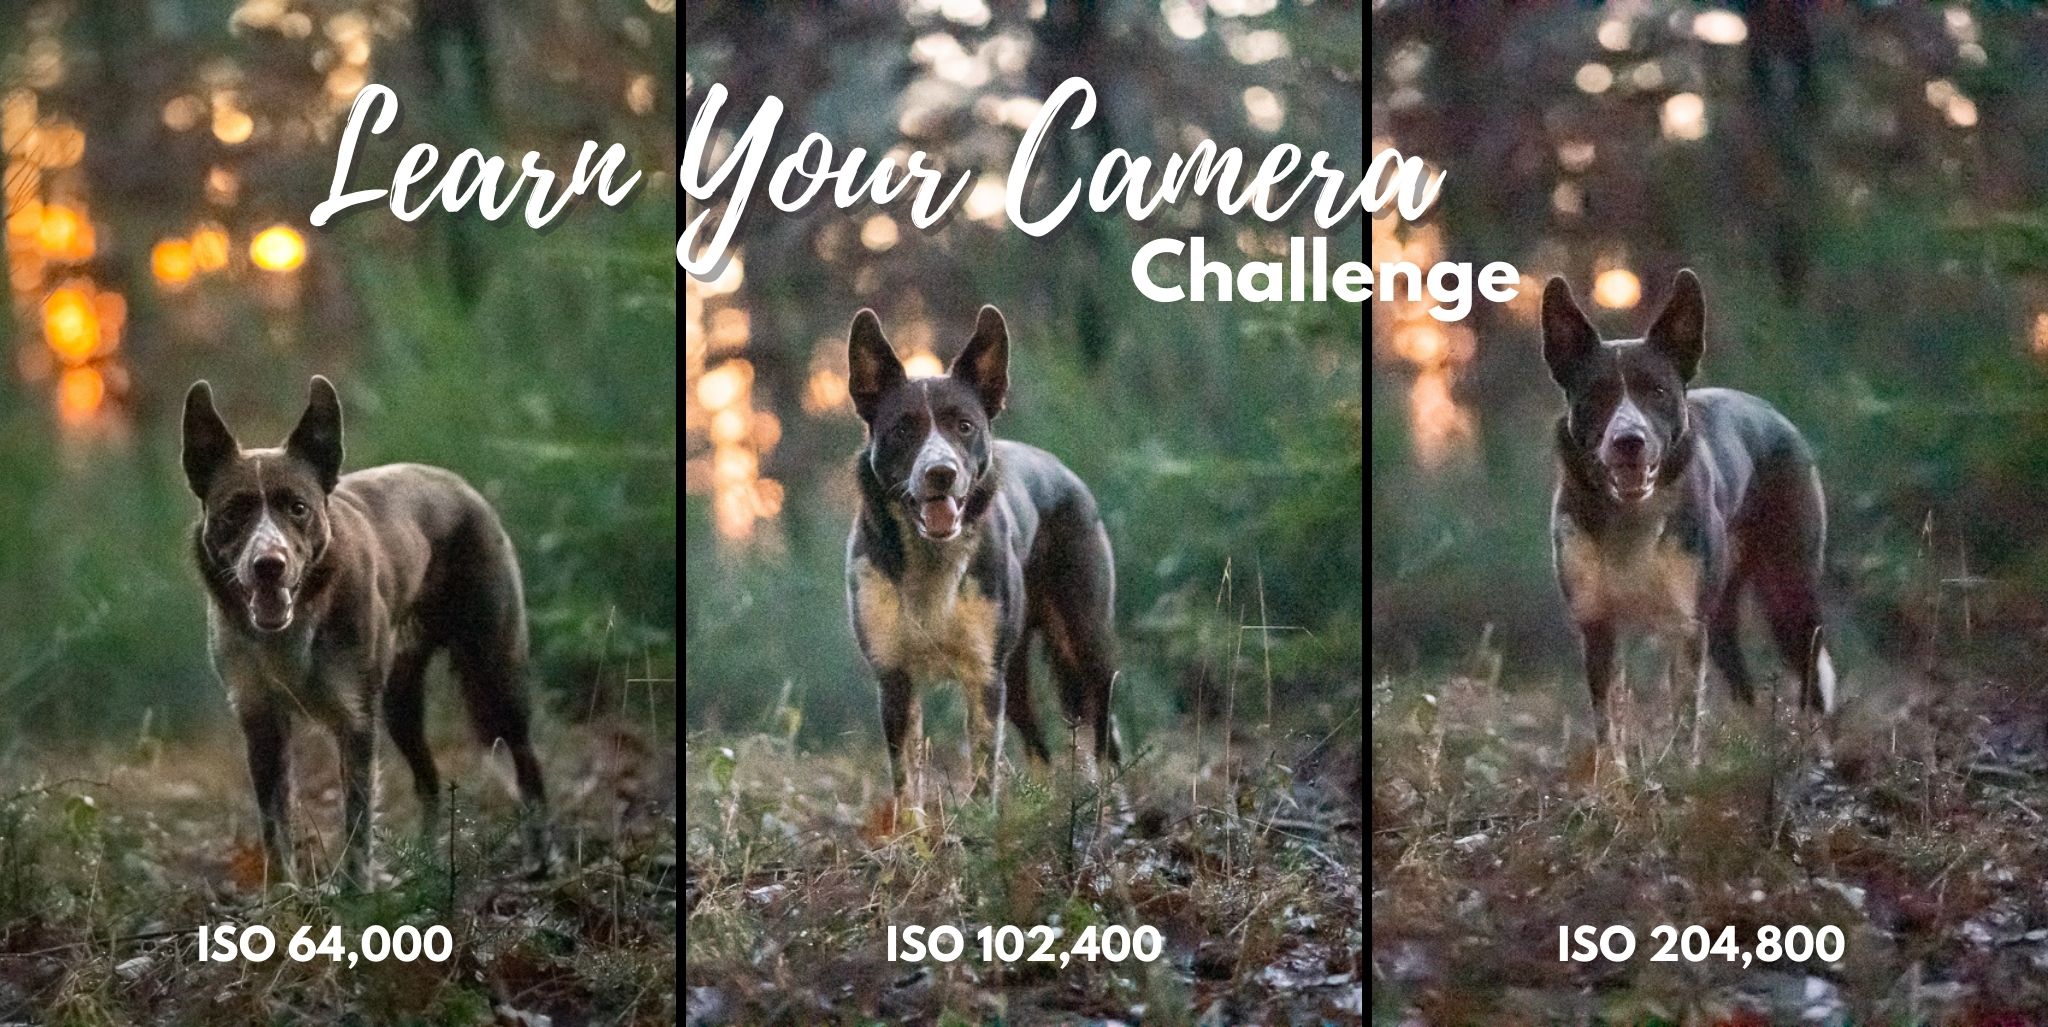 Challenge: Learn Your Camera’s Capabilities